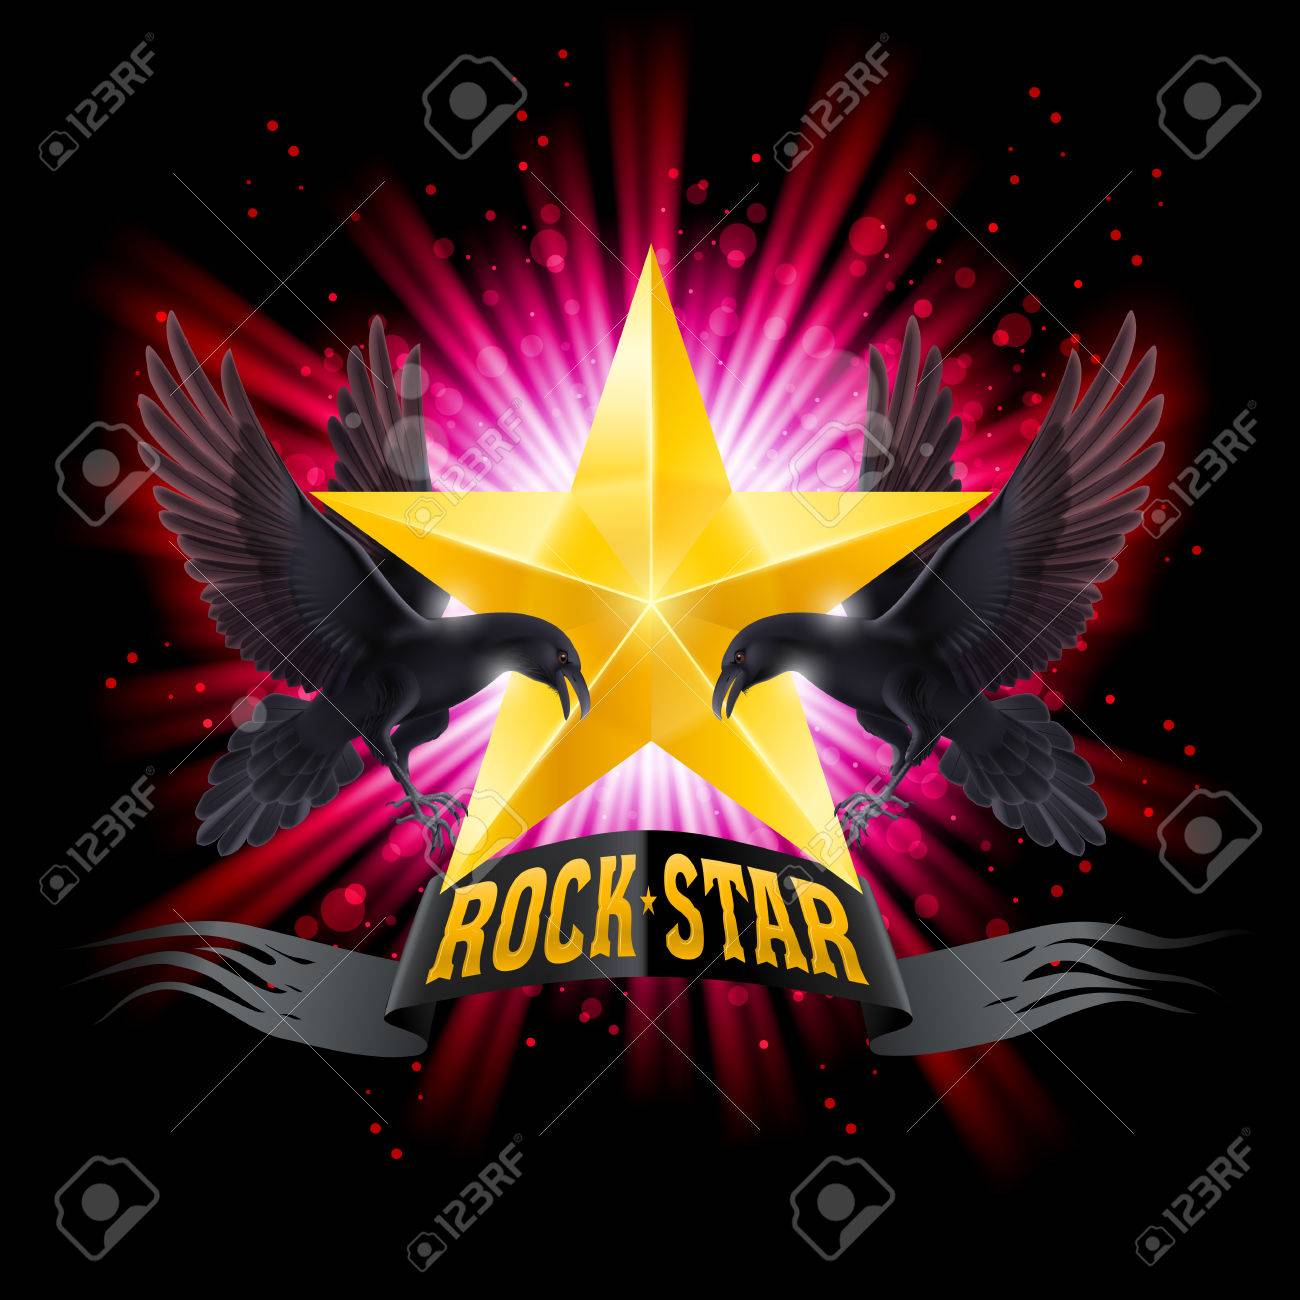 Golden Rock Star Banner With Two Ravens Over Shining Background